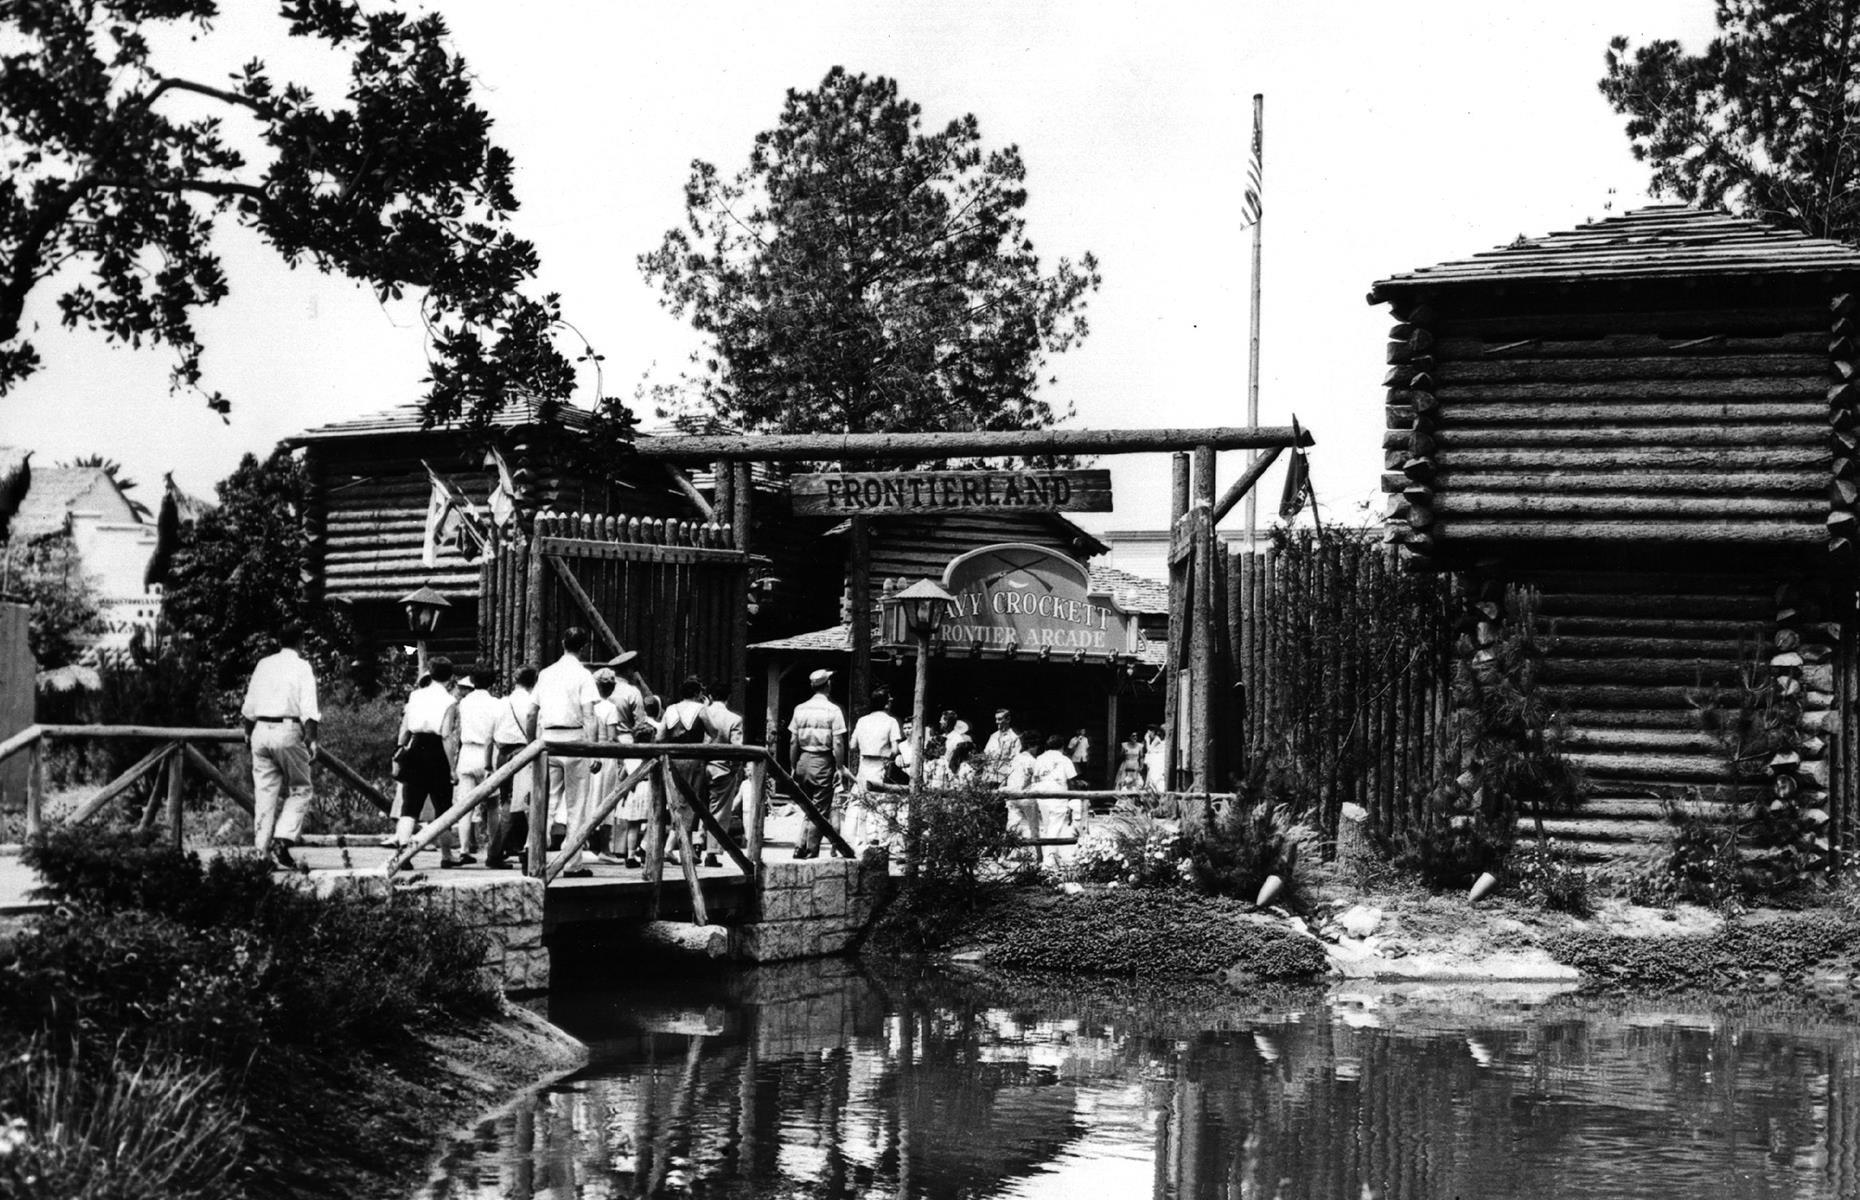 Slide 9 of 38: California's Disneyland opened with five enchanting "lands", and versions of each are still present today. These were Adventureland, Fantasyland, Tomorrowland, Main Street, U.S.A and Frontierland, the entrance to which is pictured here in 1955. Frontierland was designed to evoke America's Old West with early attractions including a horse-drawn Conestoga wagon and stagecoach and the Golden Horseshoe Saloon.